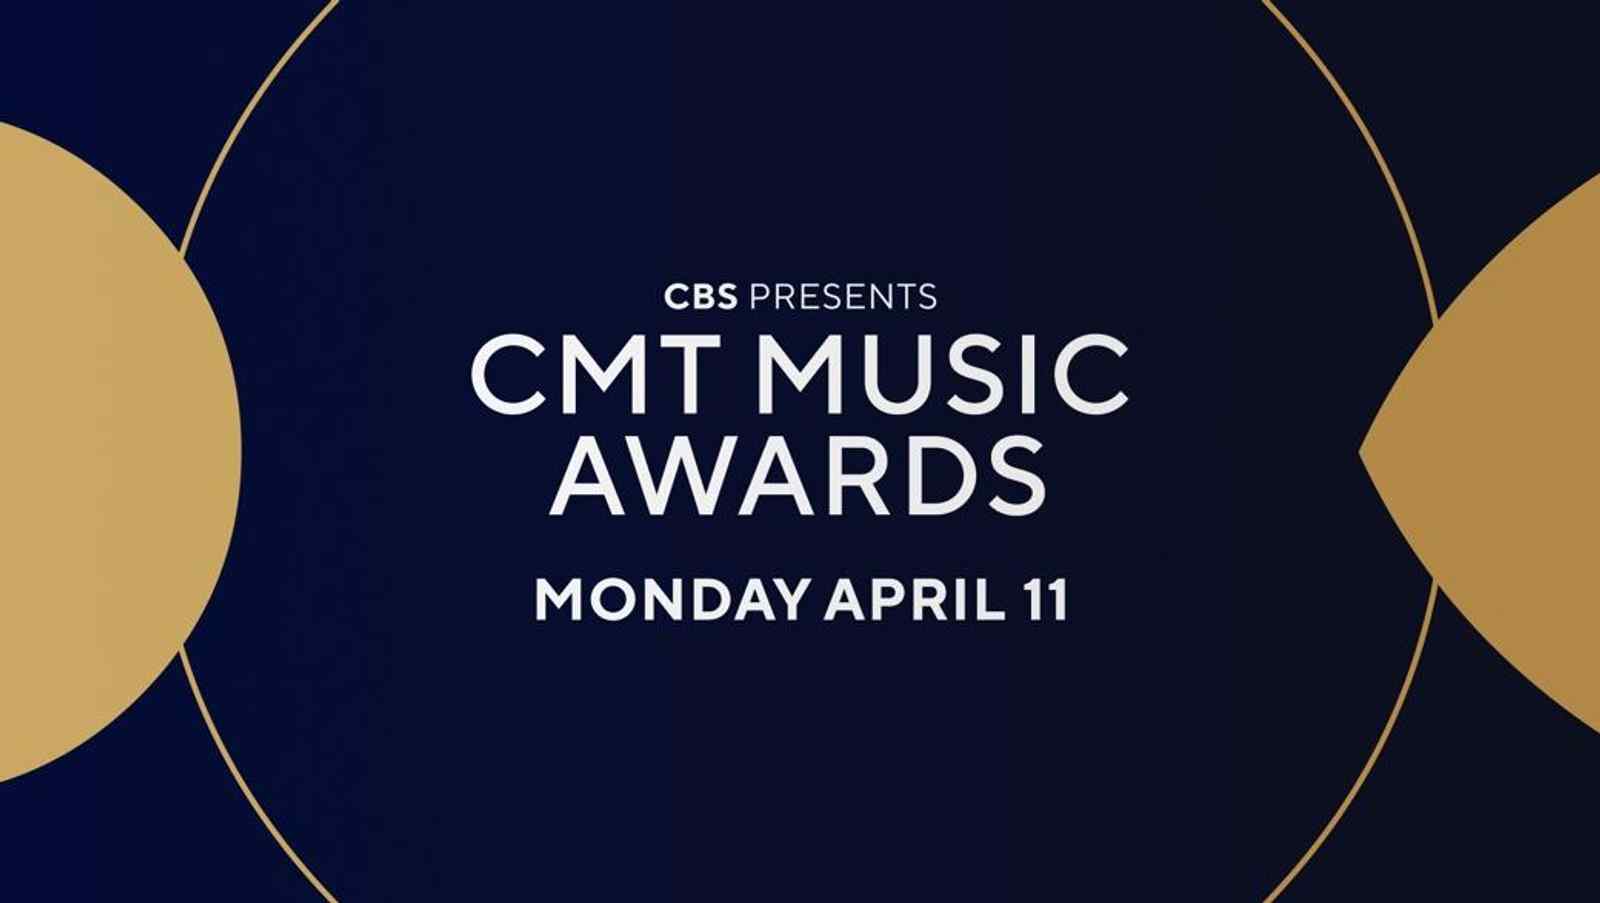 2022 “CMT MUSIC AWARDS” ANNOUNCE NEW DATE AND VENUE FOR INAUGURAL BROADCAST ON CBS